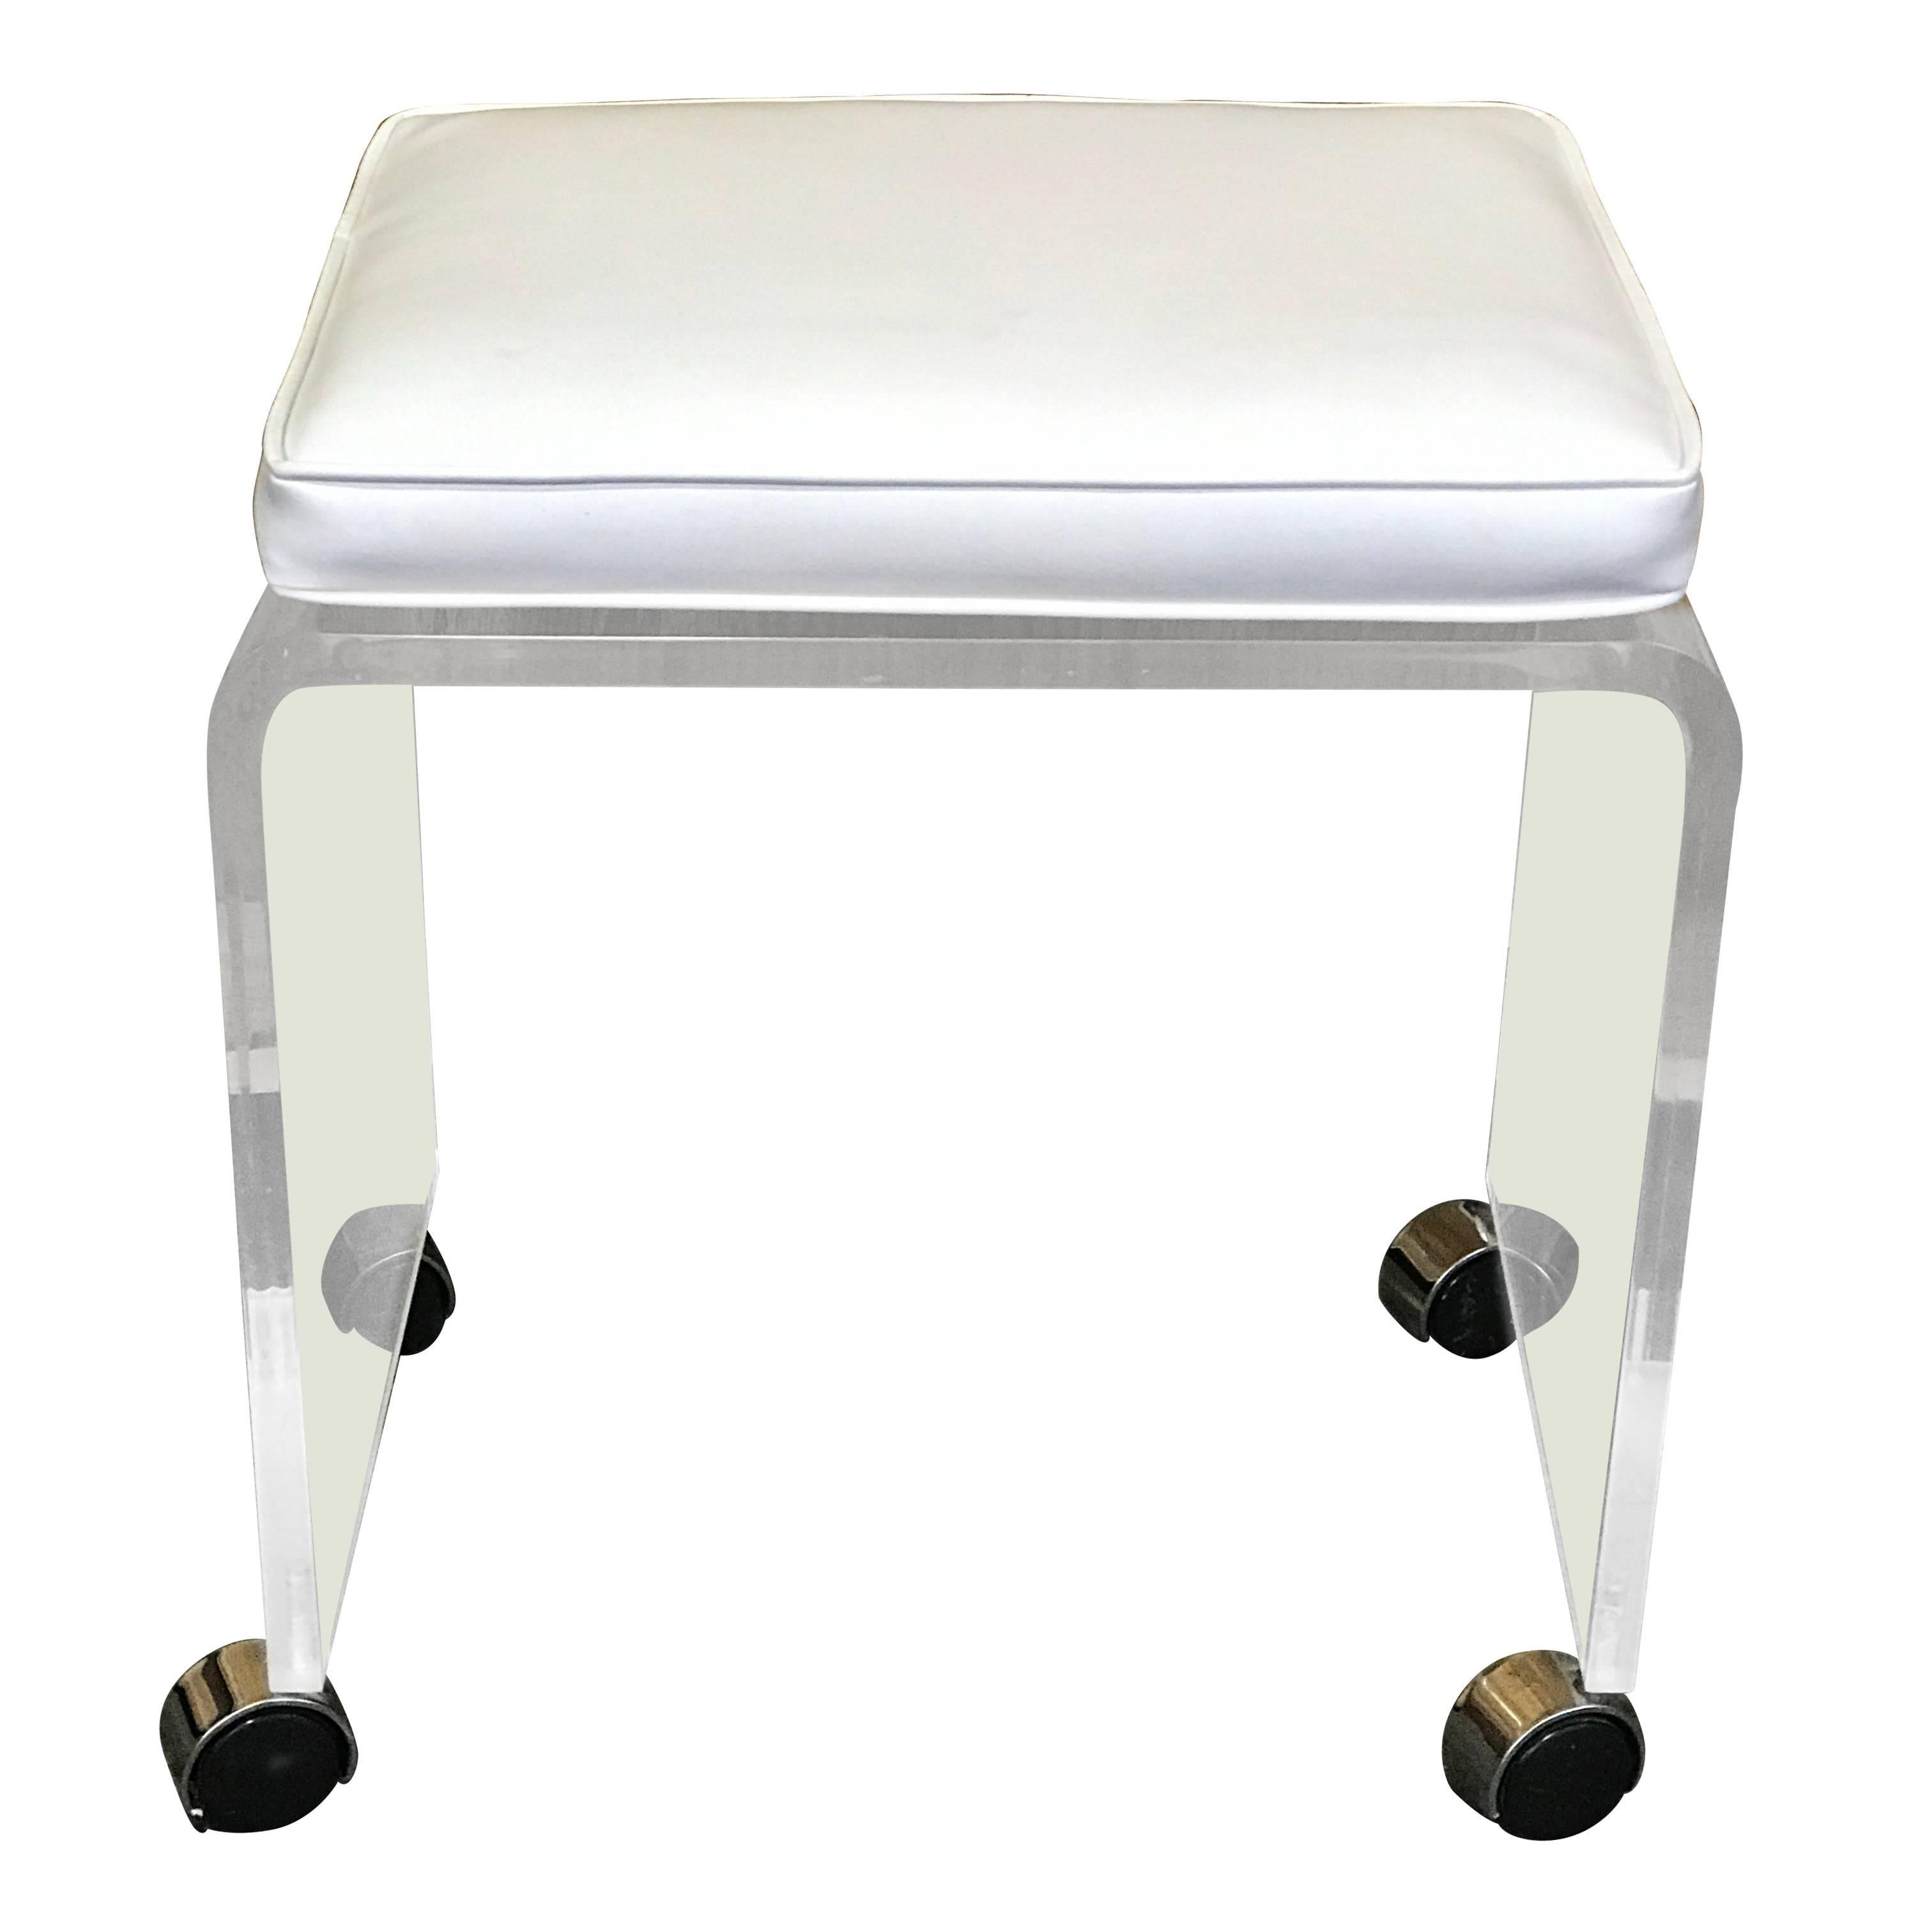 Lucite Bench or Stool with White Naugahyde Cushion Raised on Chrome Casters